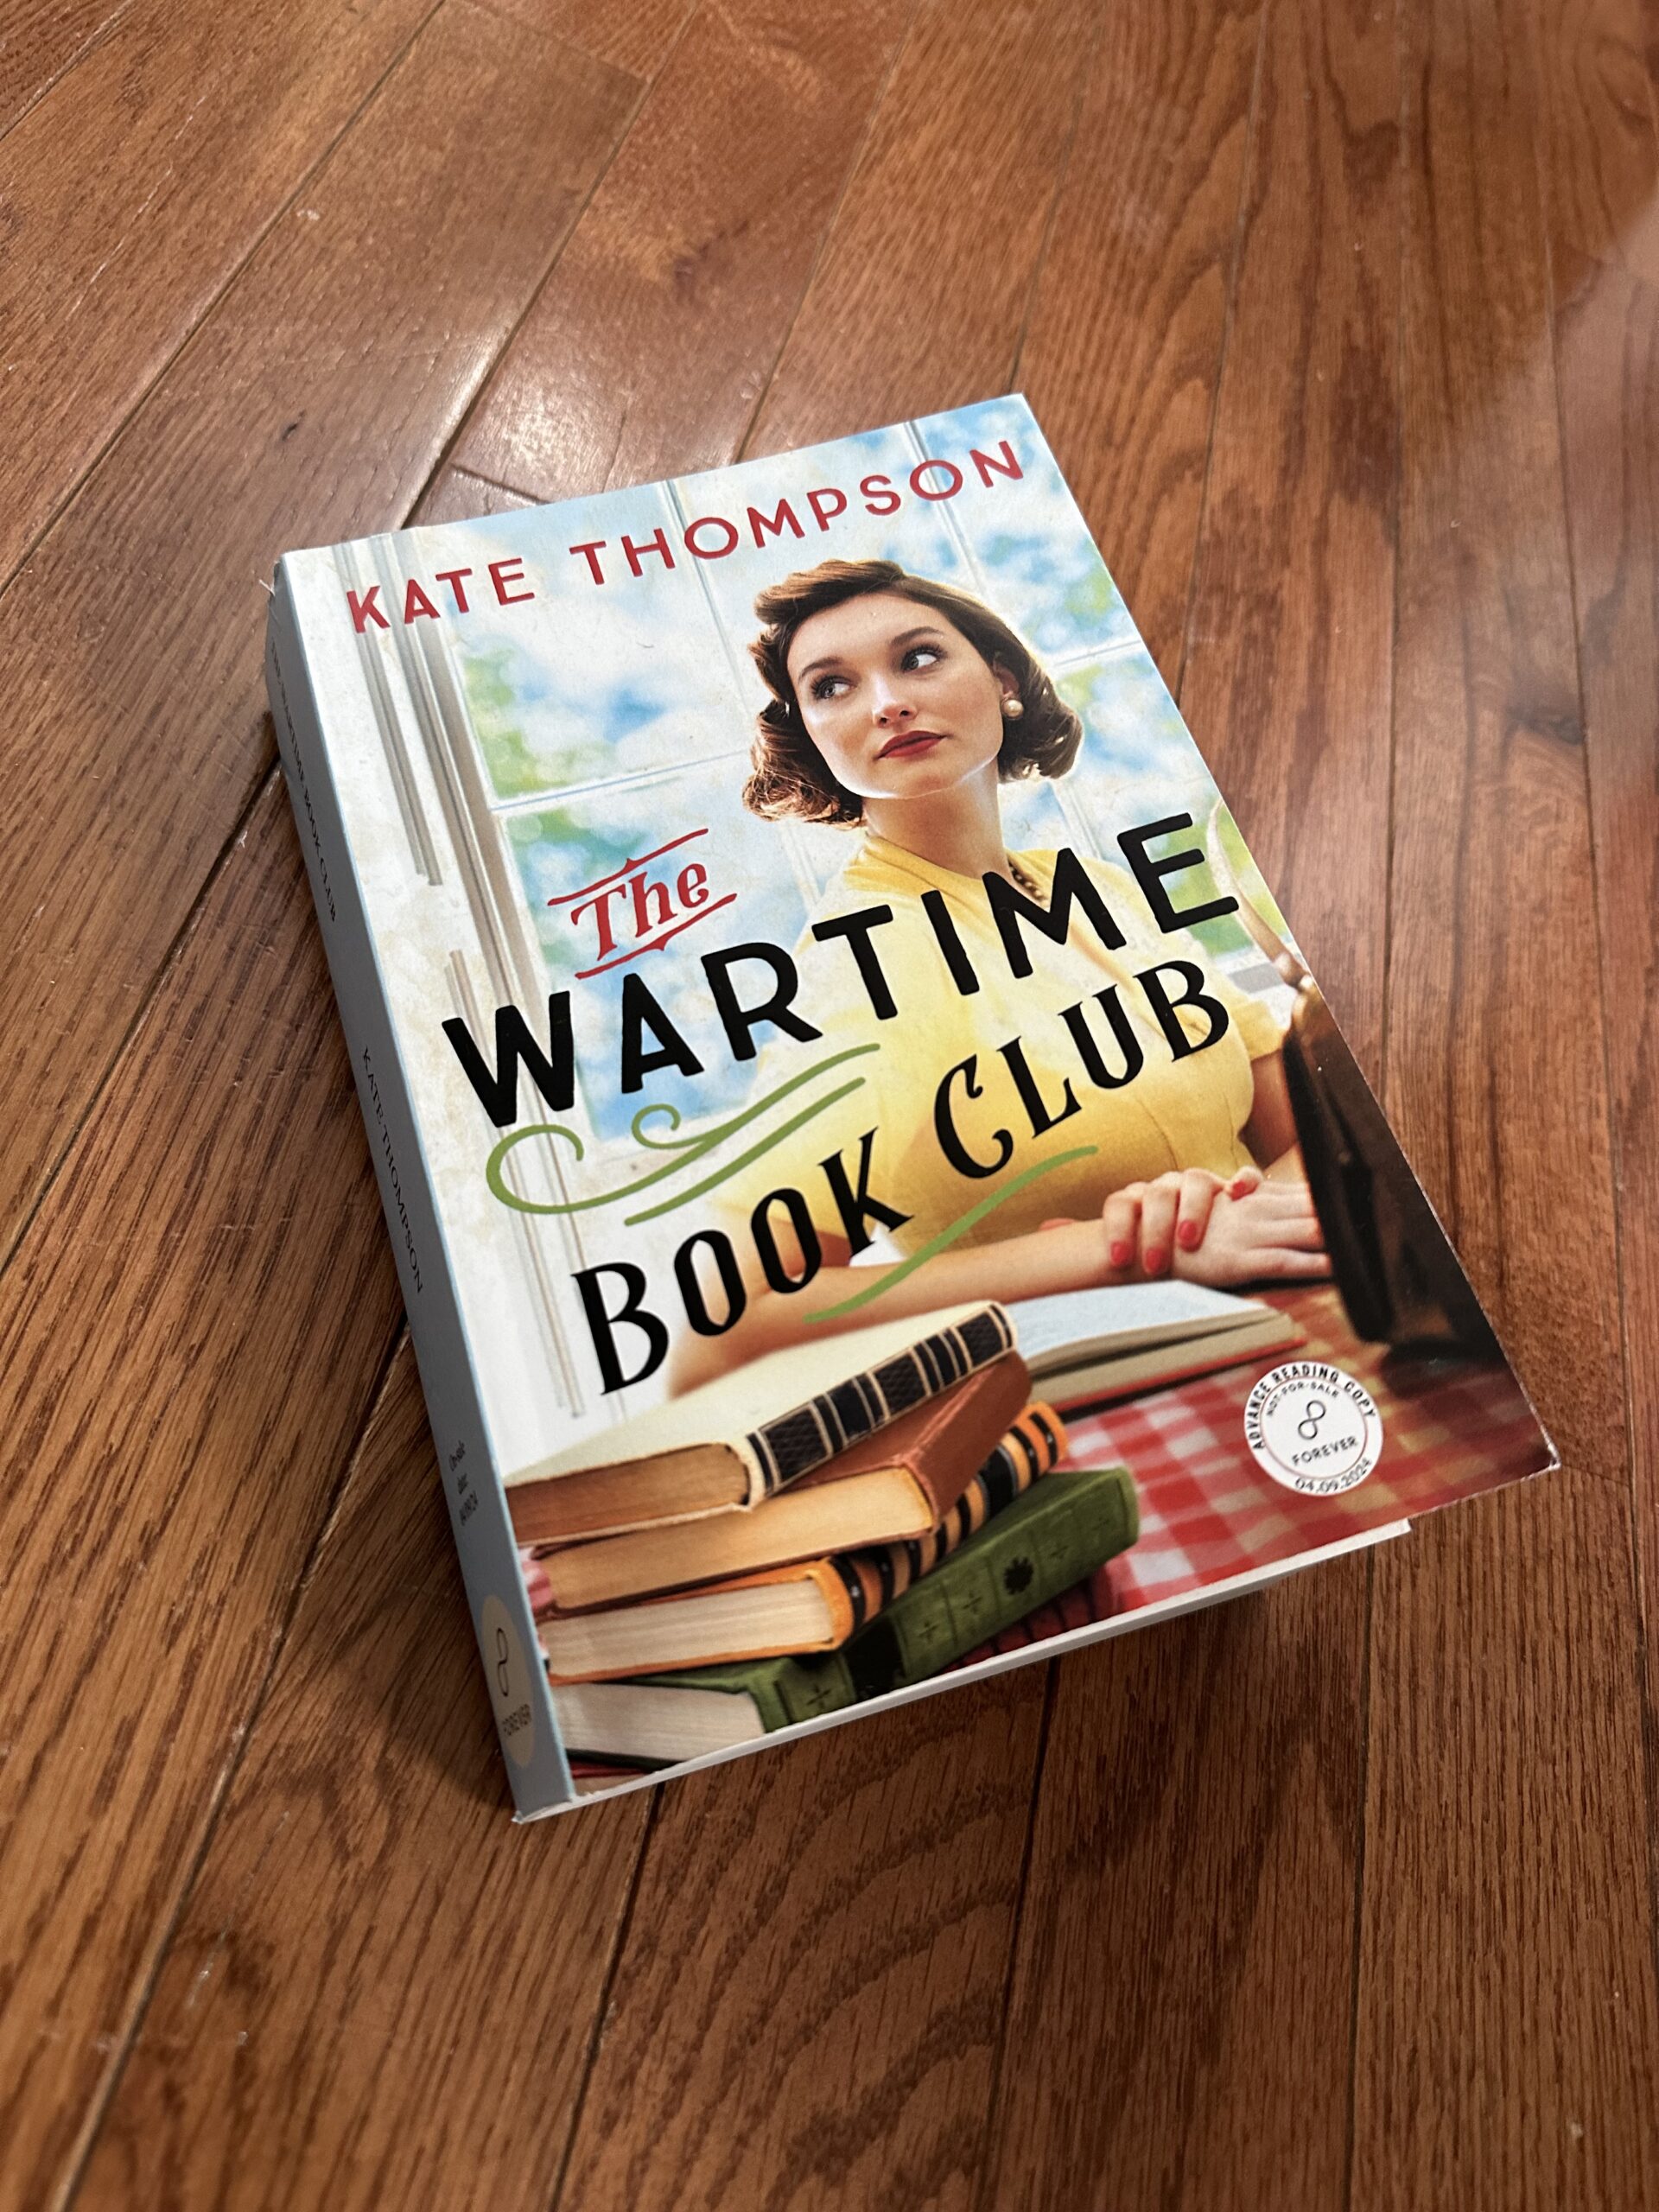 The Wartime Book Club by Kate Thompson.